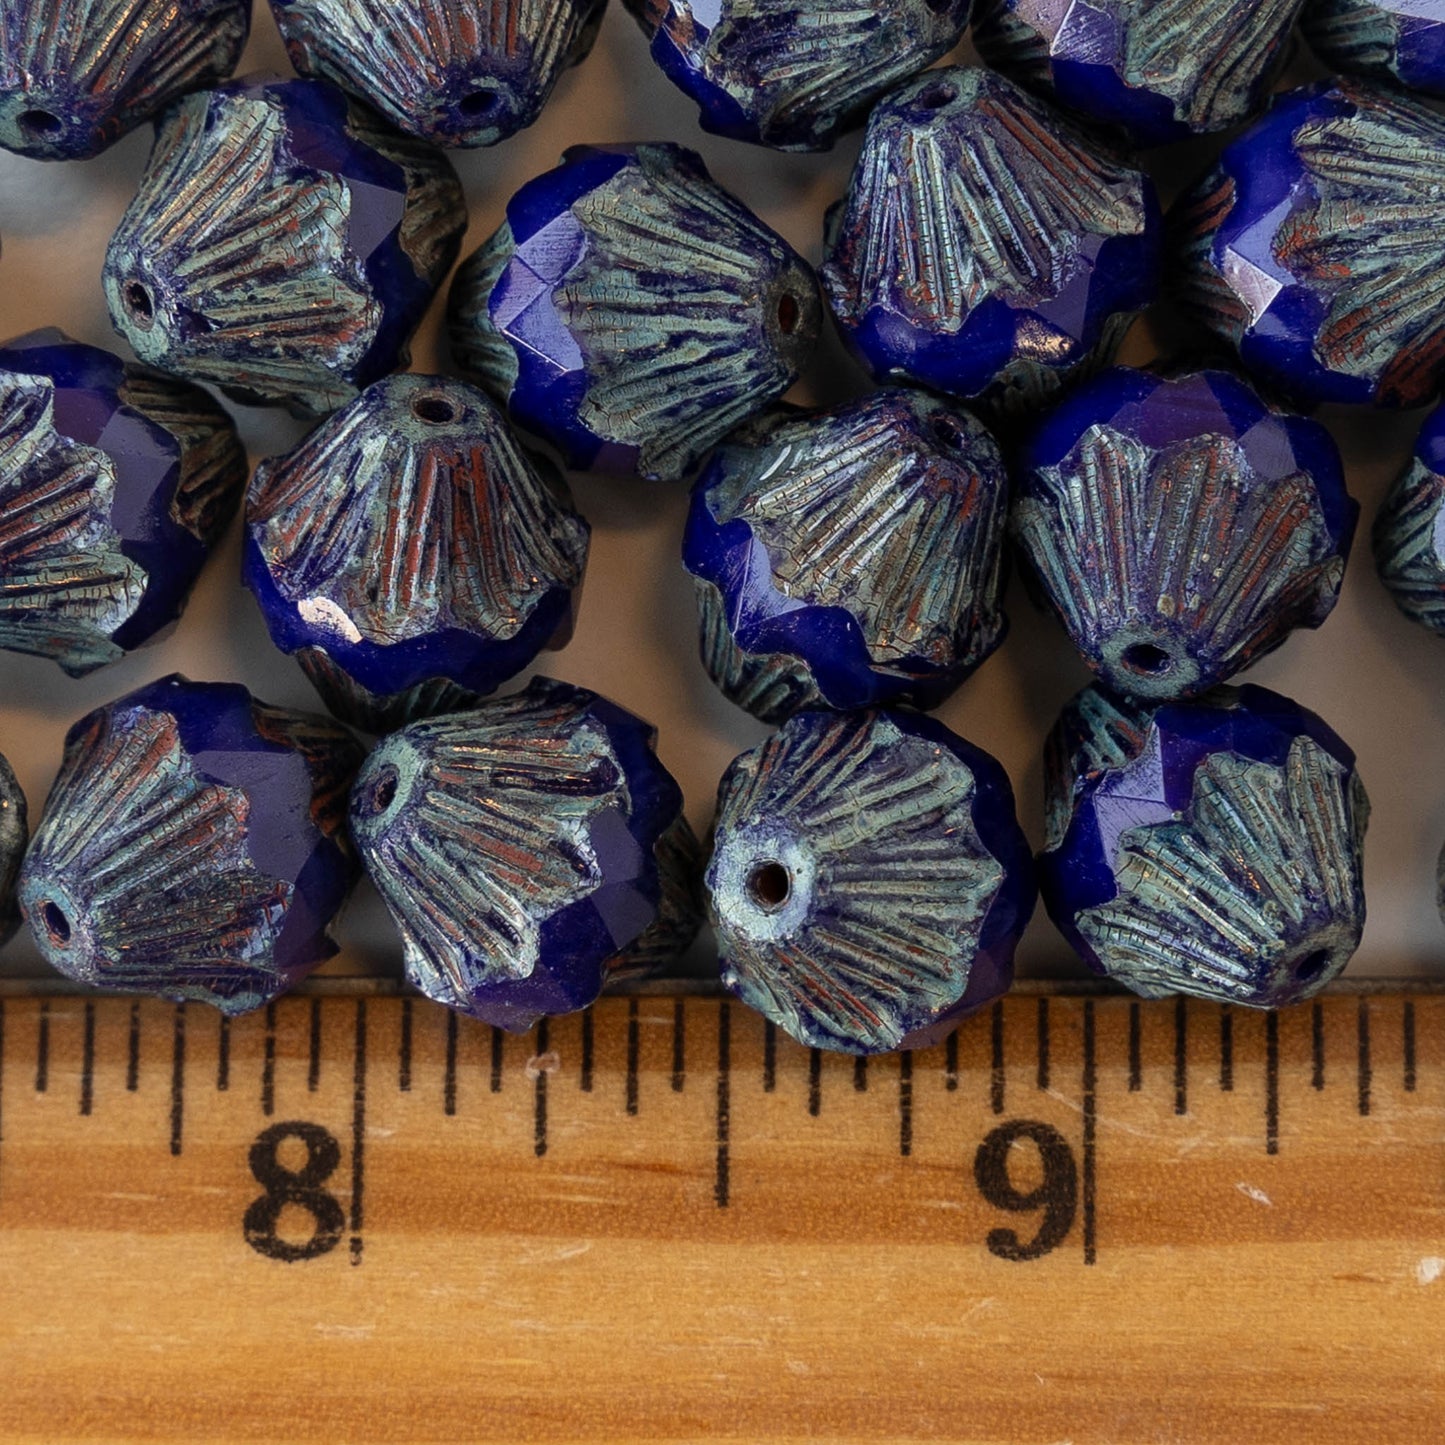 11x13mm Bi-cone Beads - Blue with Picasso - 4 Beads